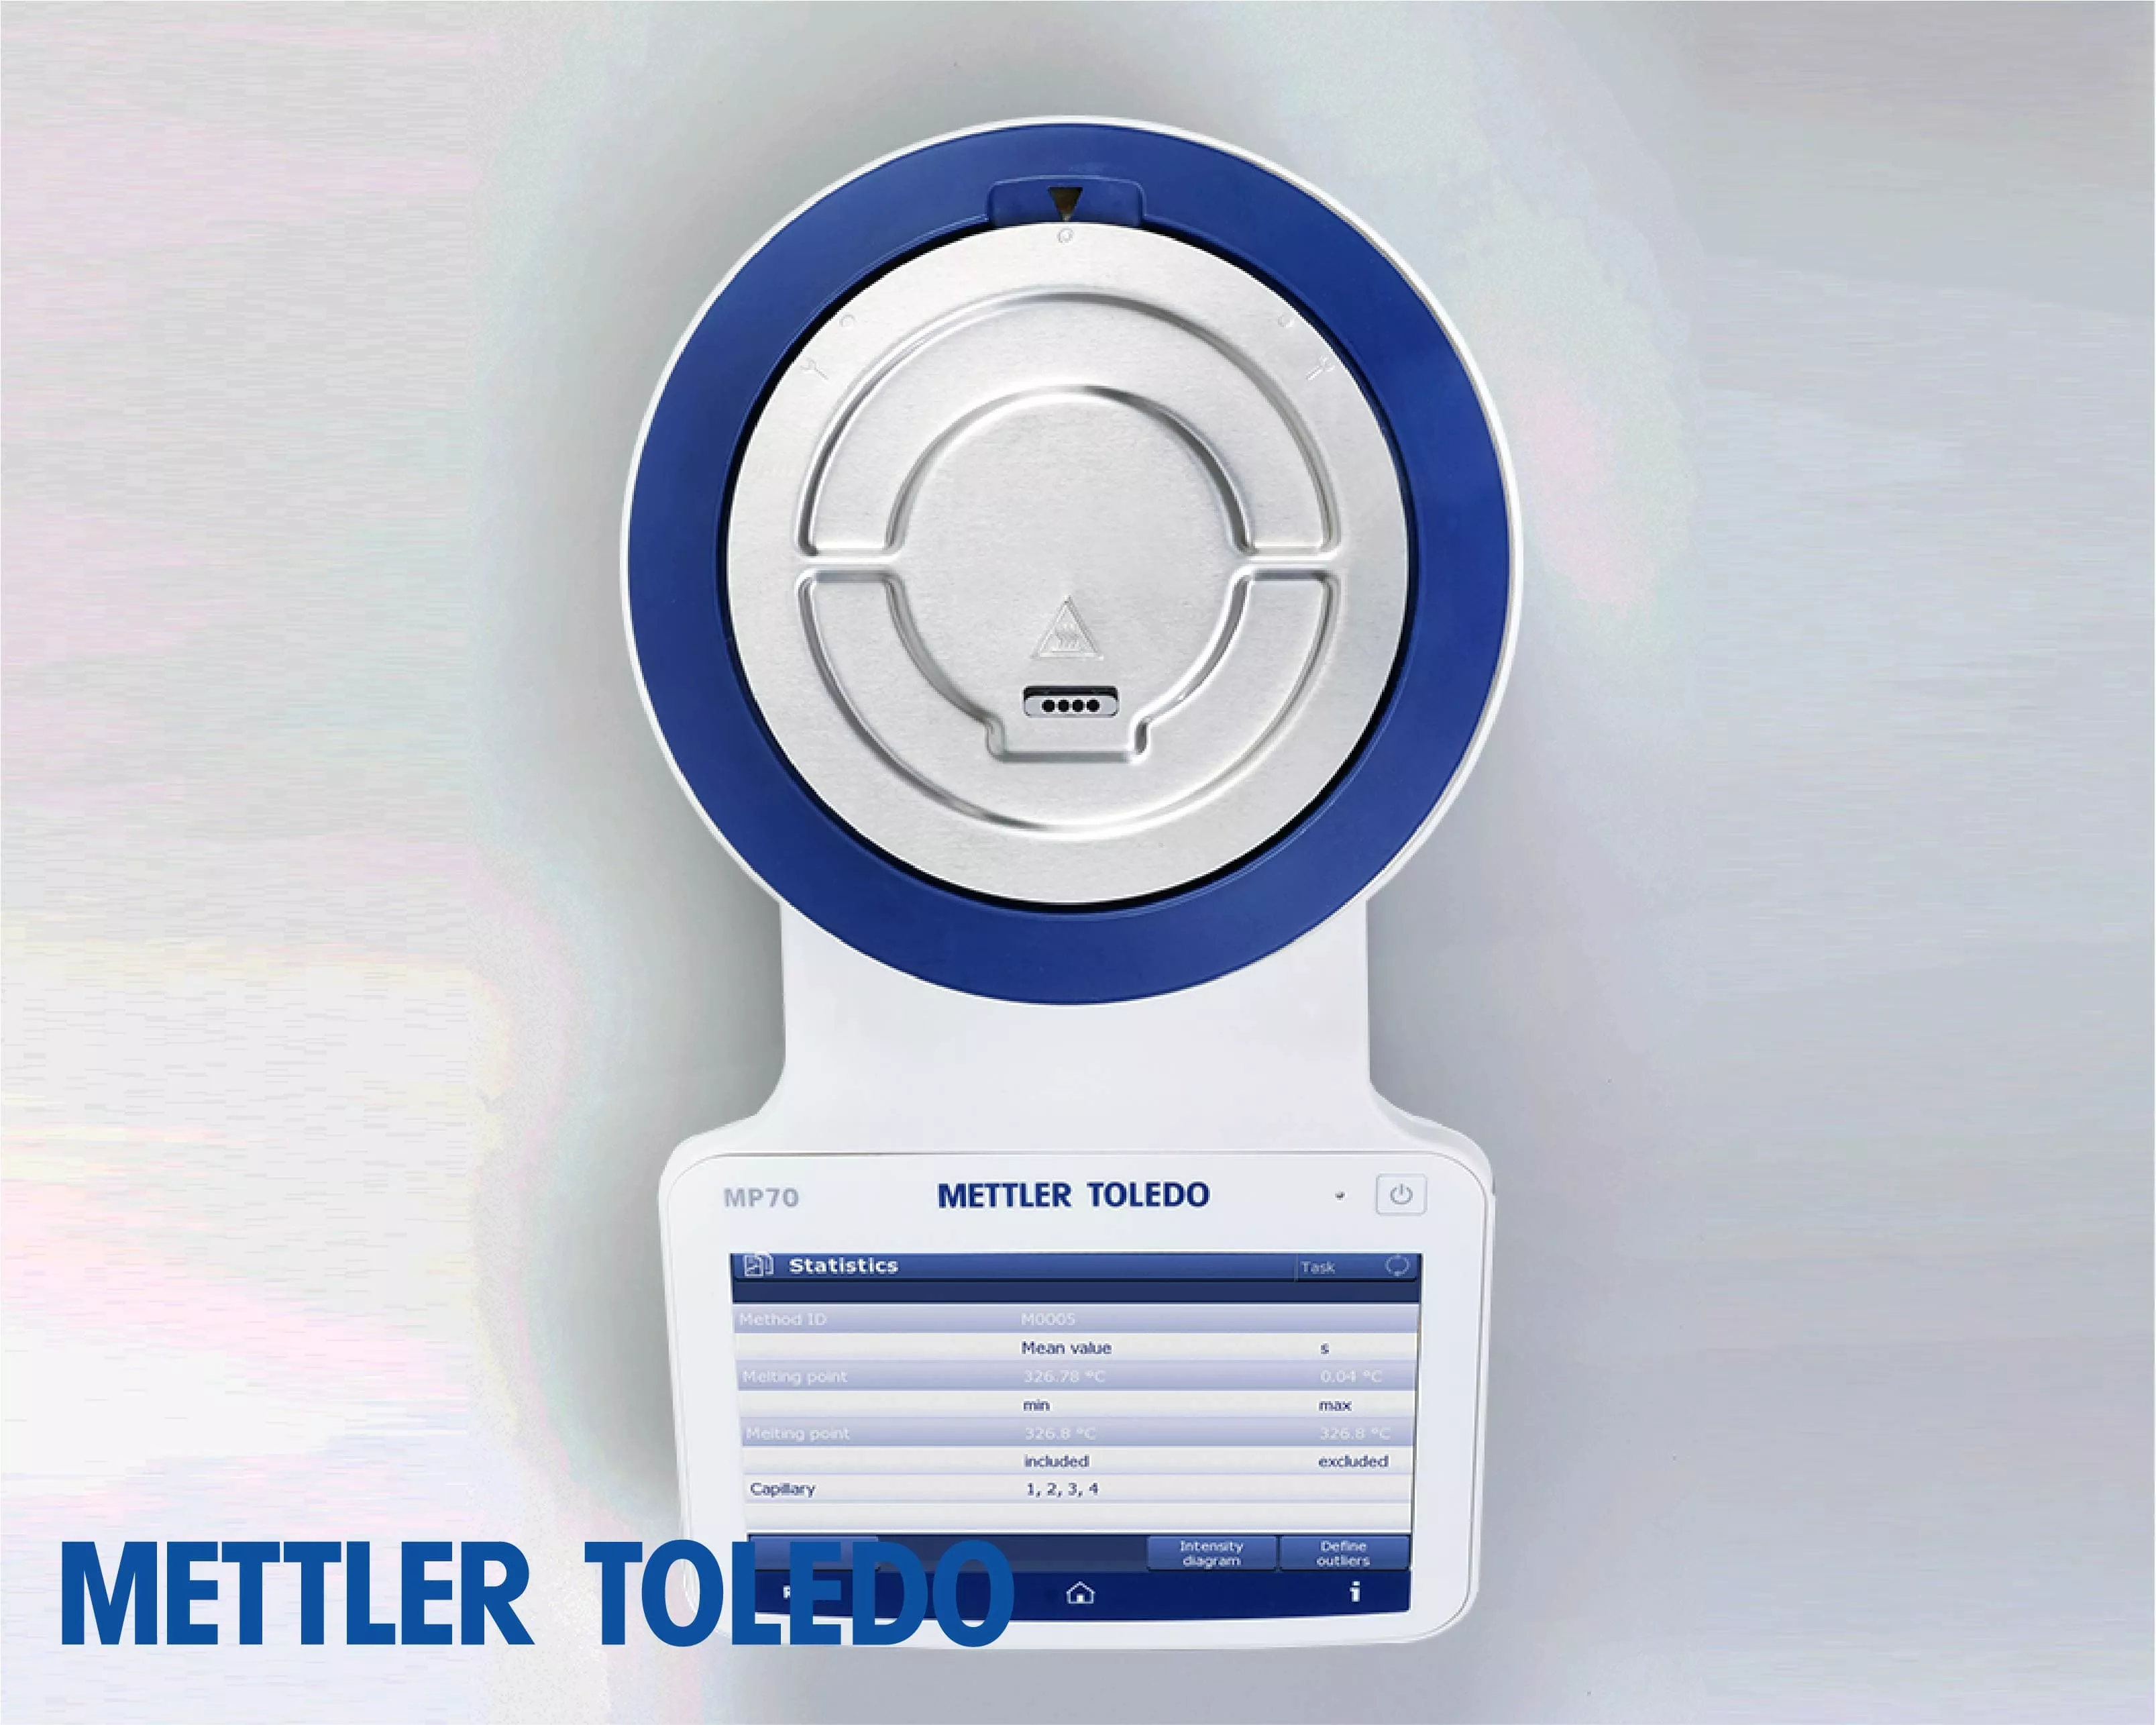 Mettler Toledo Melting Point and Dropping Point